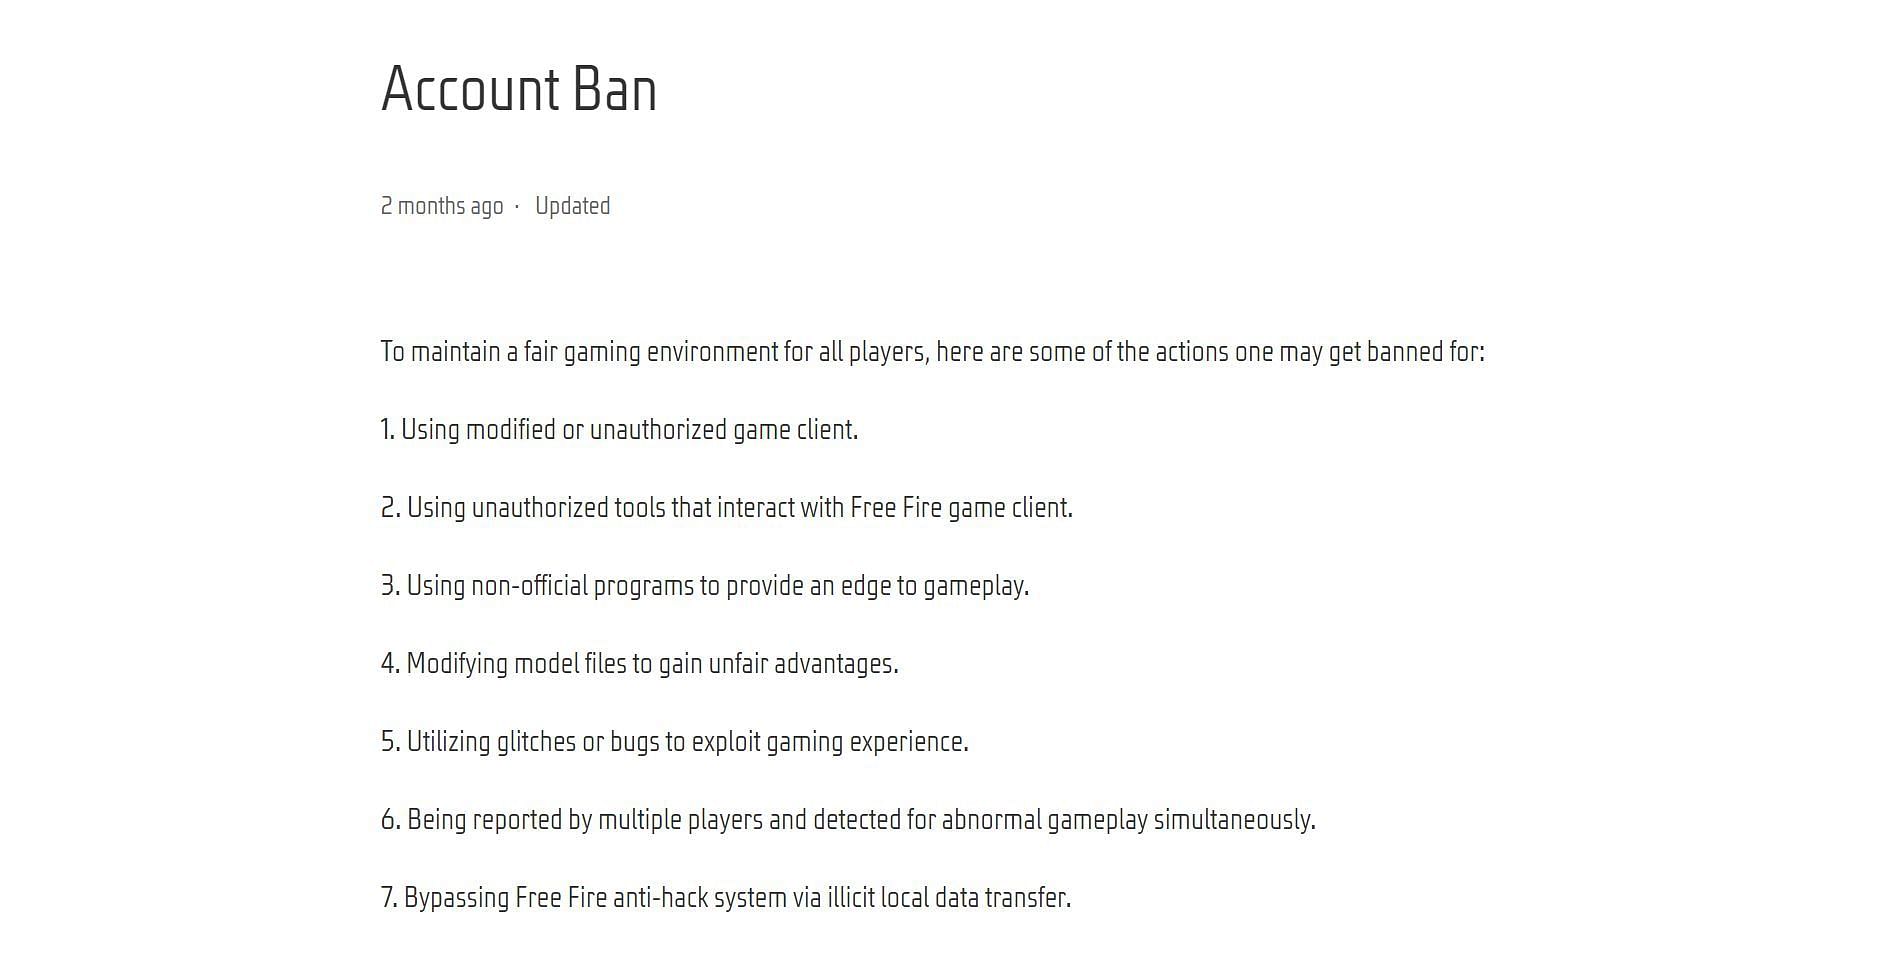 Garena Free Fire - Hackers are detected and banned daily. Our enhanced anti- hack system wipes out cheaters who use modified client or third-party  programs. Do not hack. #PLAYFAIR